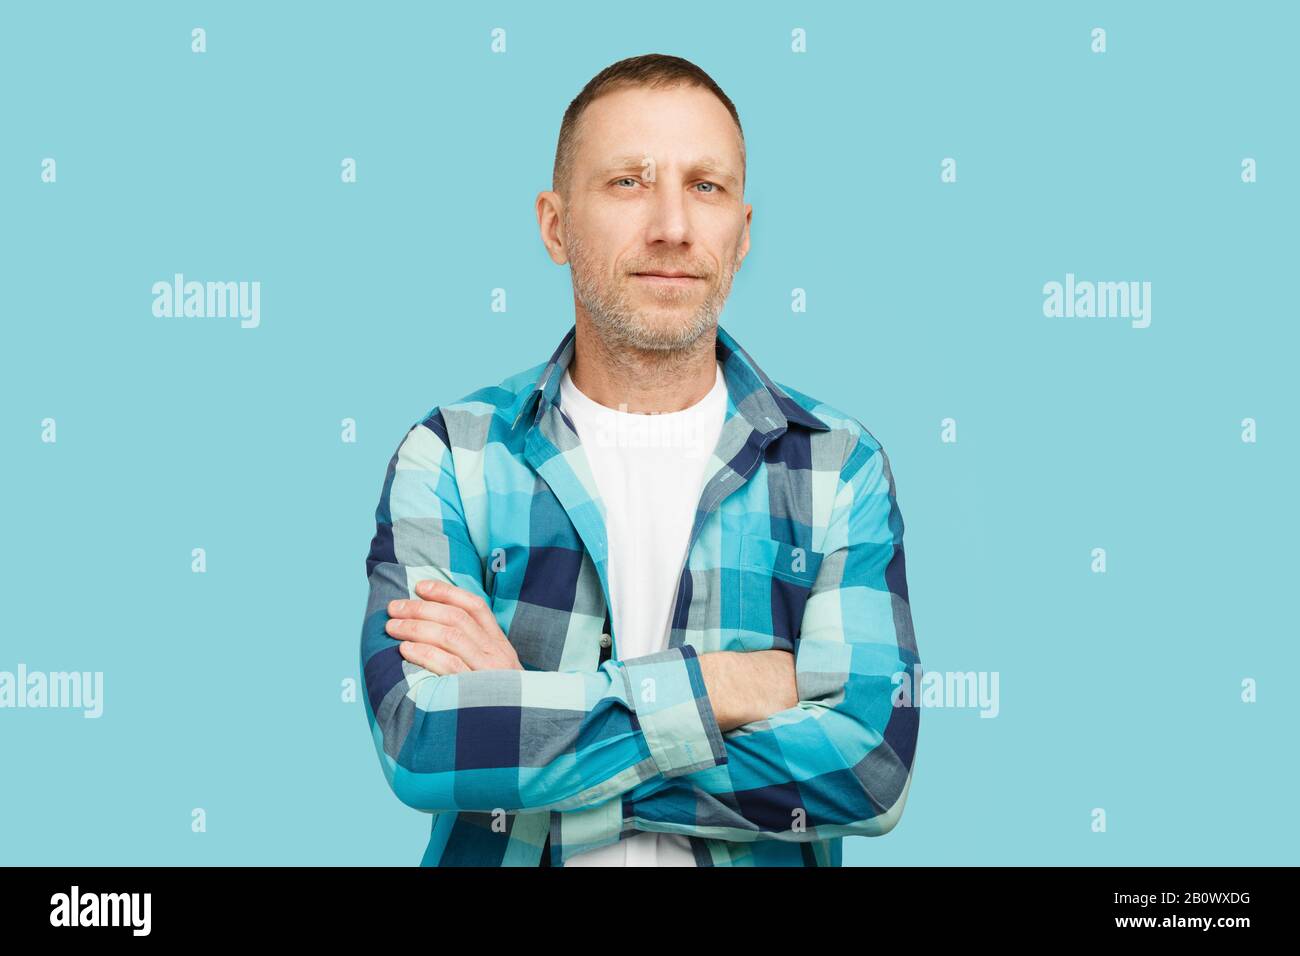 Bearded man crossed arms wearing a white t-shirt and blue checkered shirt on a blue background. Stock Photo